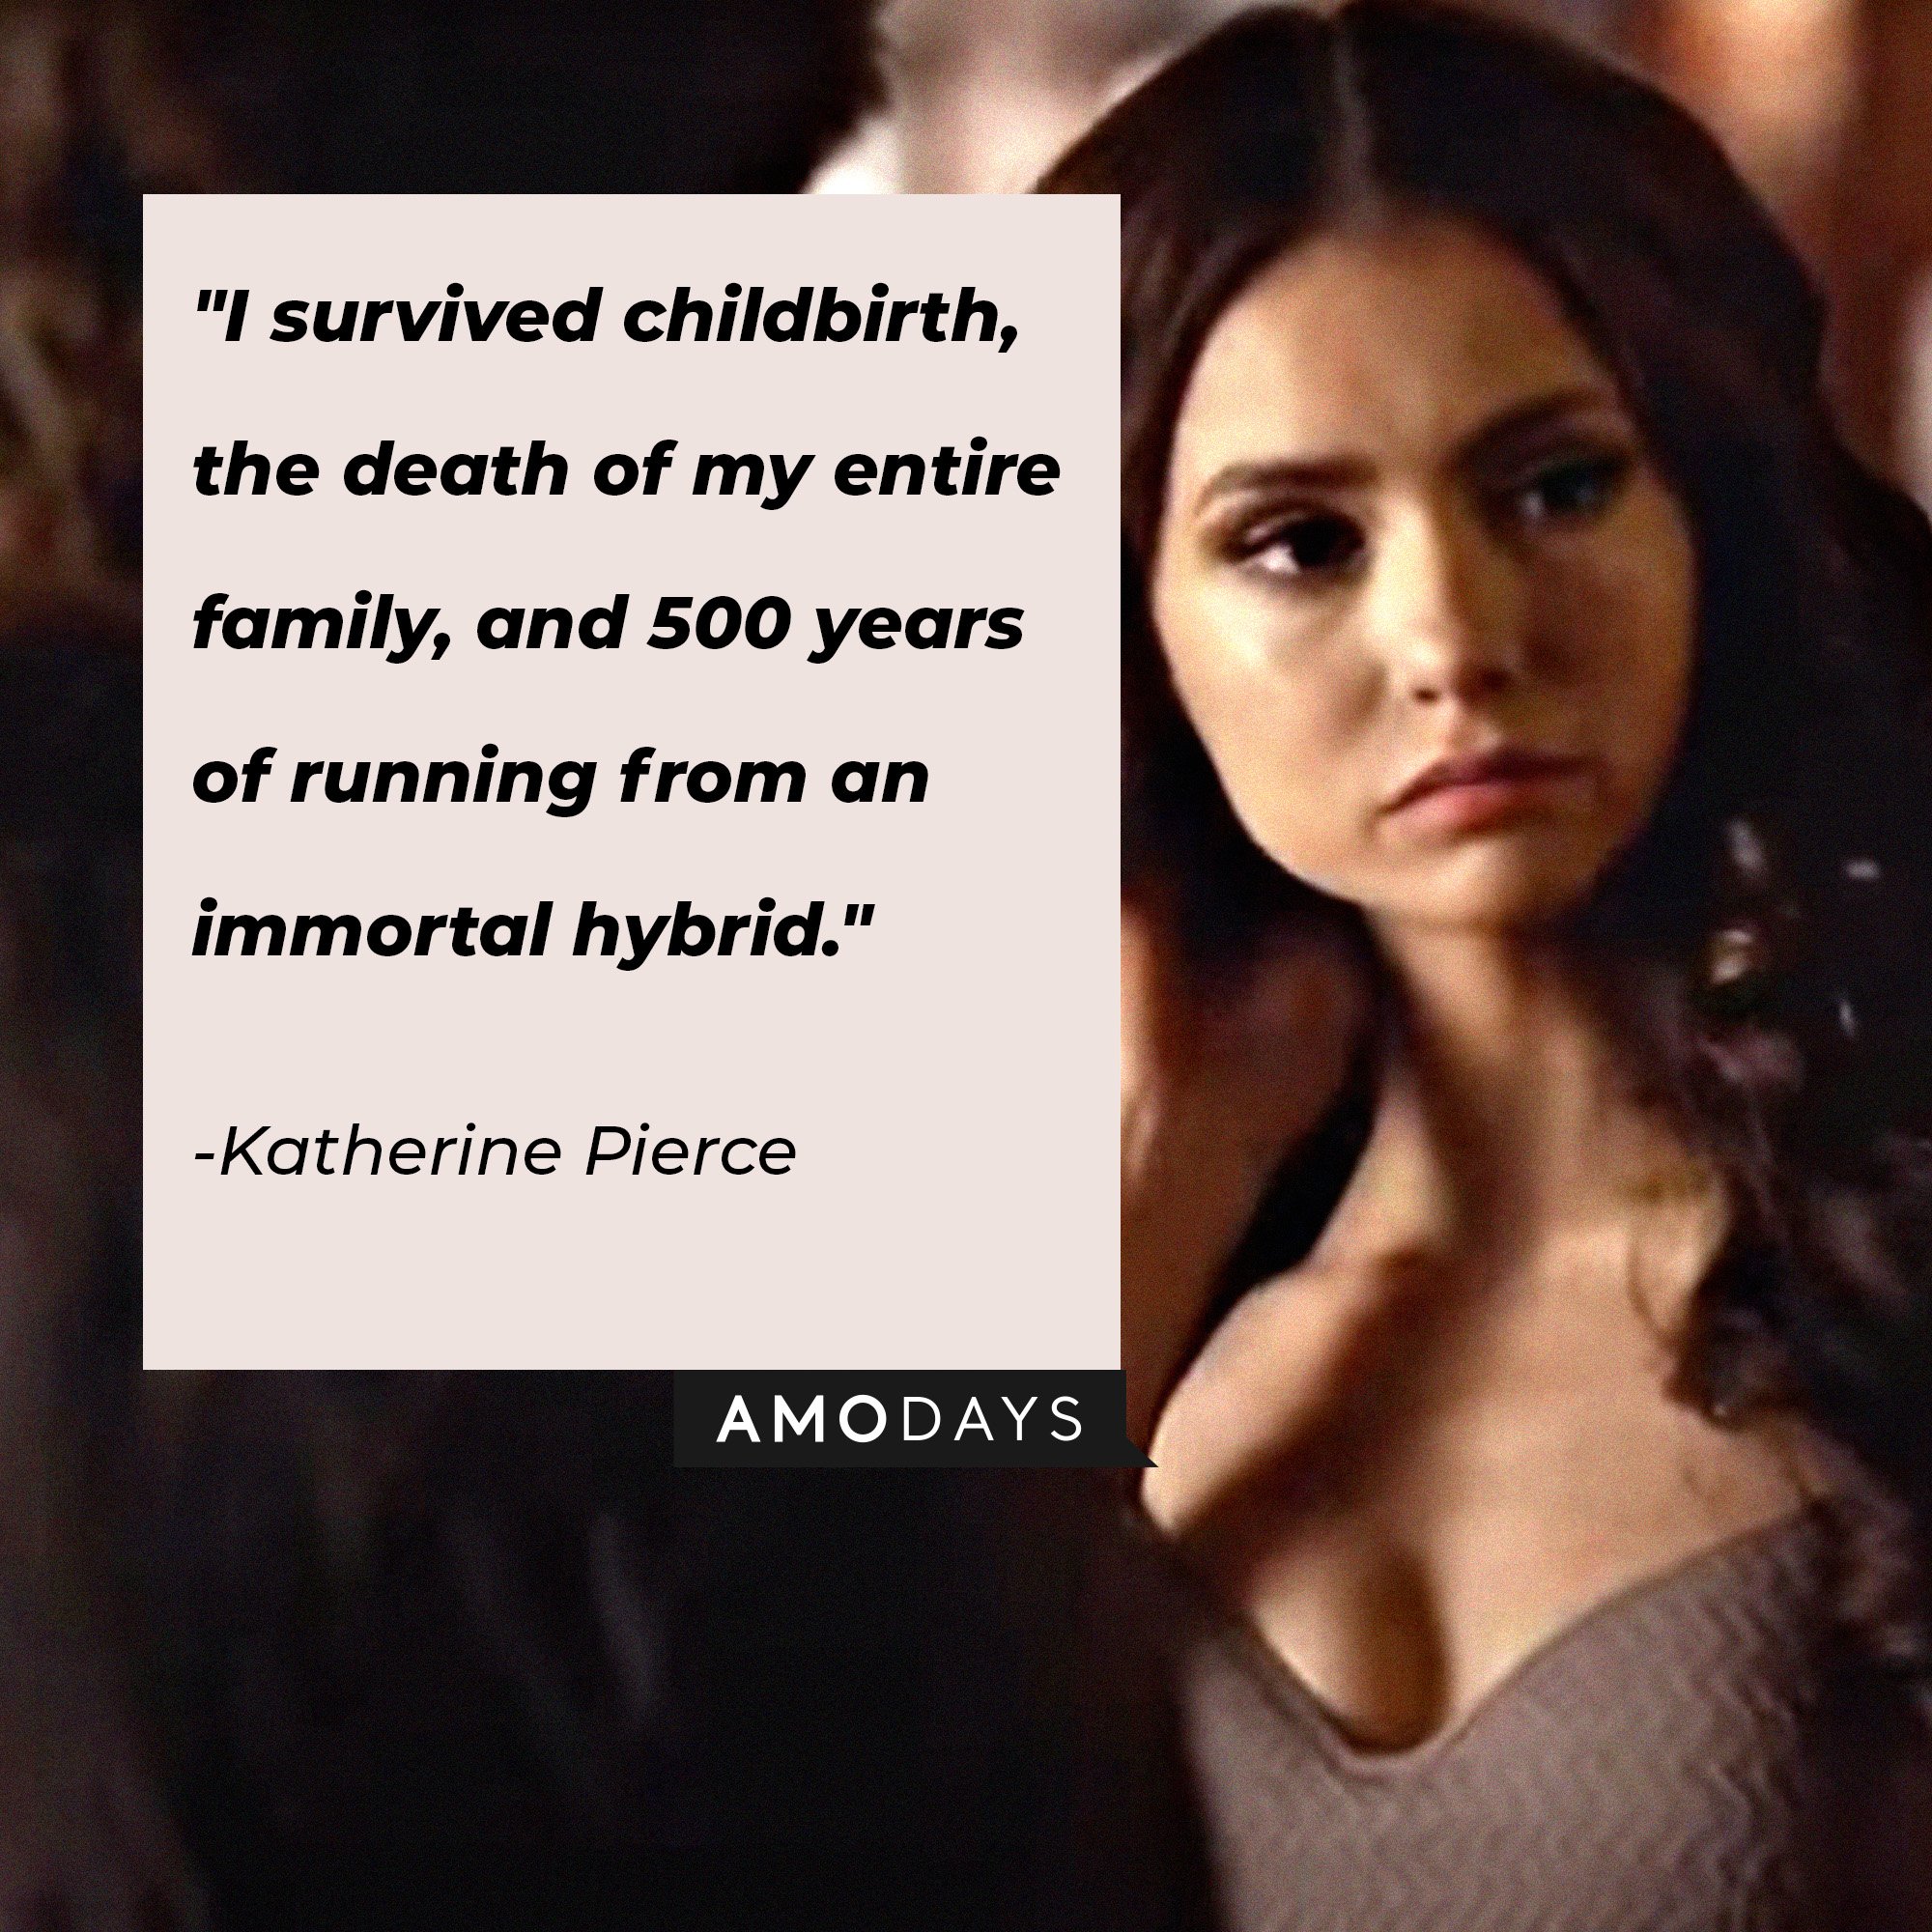 Katherine Pierce's quote: "I survived childbirth, the death of my entire family, and 500 years of running from an immortal hybrid.” | Image: AmoDays